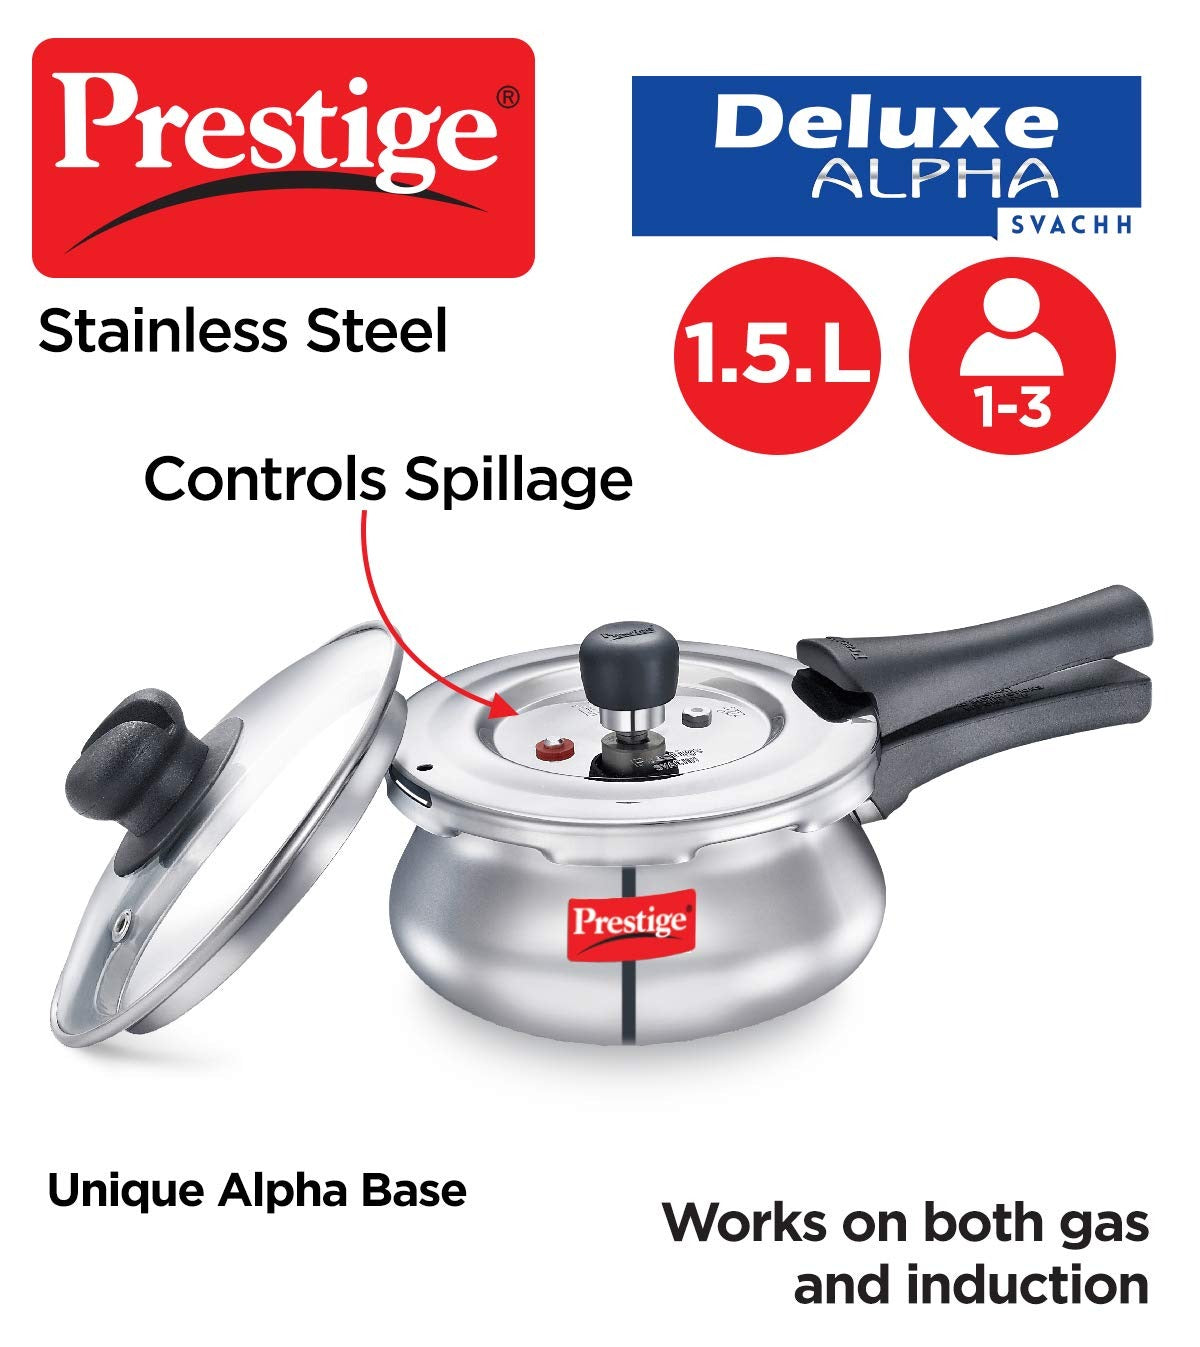 Prestige Deluxe Alpha Svachh Stainless Steel Outer Lid Pressure Cooker 1.5L with Glass Lid (With Deep Lid For Spillage Control)